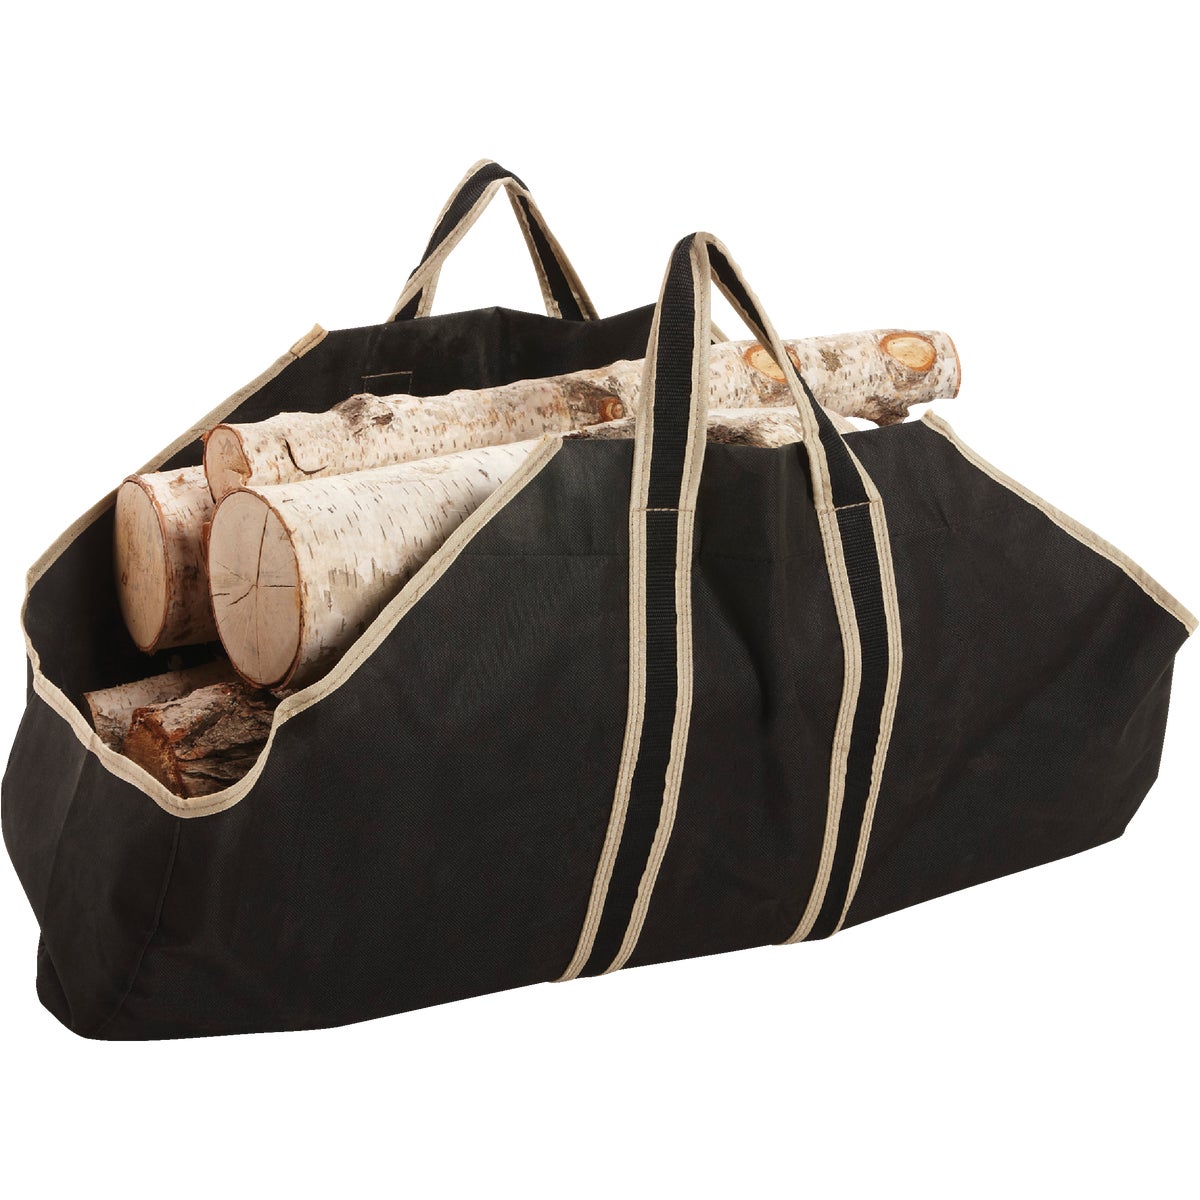 Home Impressions 35-1/2 In. W x 22 In. H Canvas Log Carrier